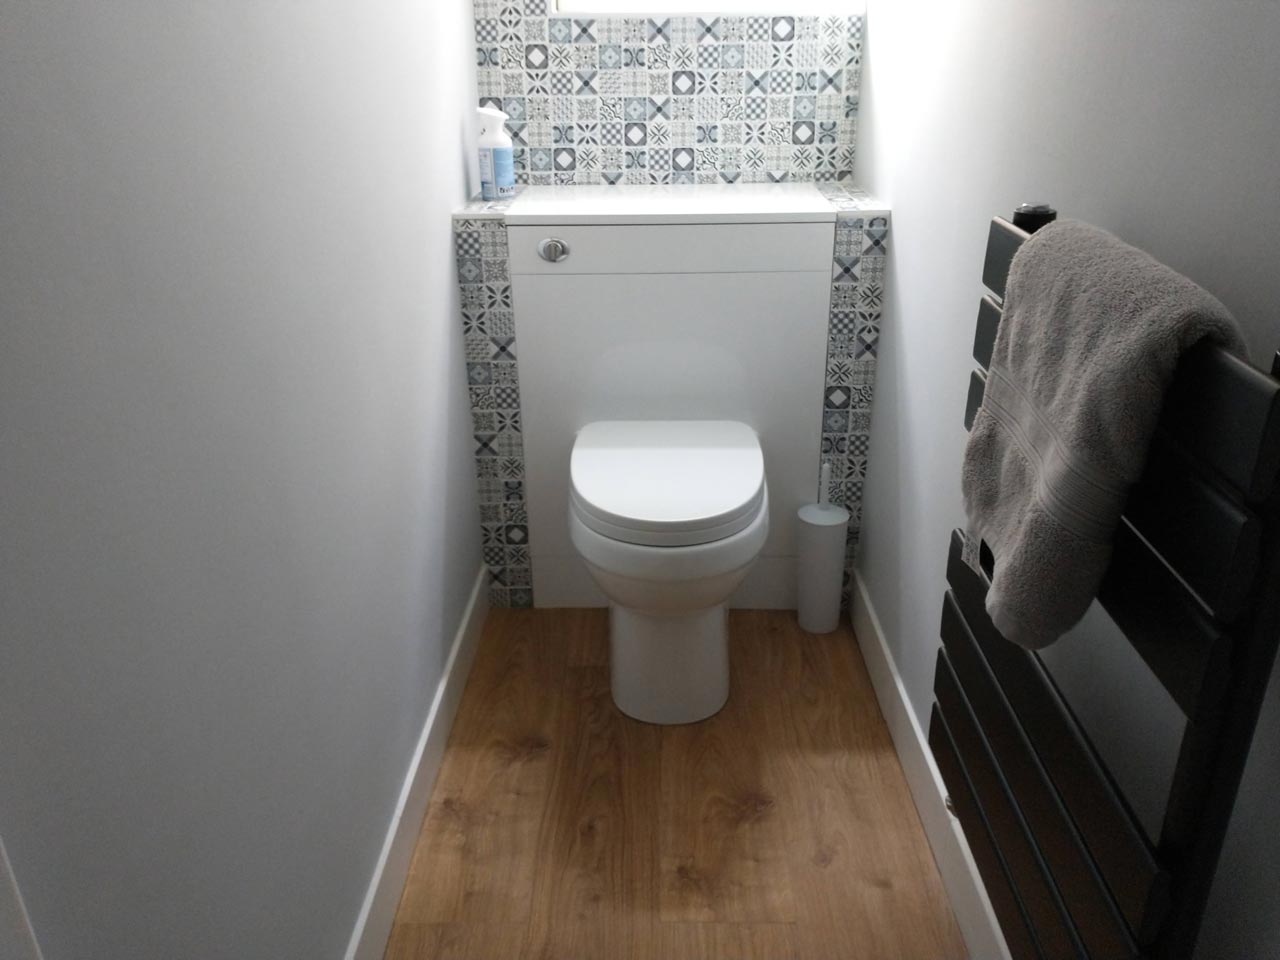 New Toilet Ground Floor Flat in Highcliffe - After - Emerald Builders Ltd Bournemouth Poole Christchurch Dorset